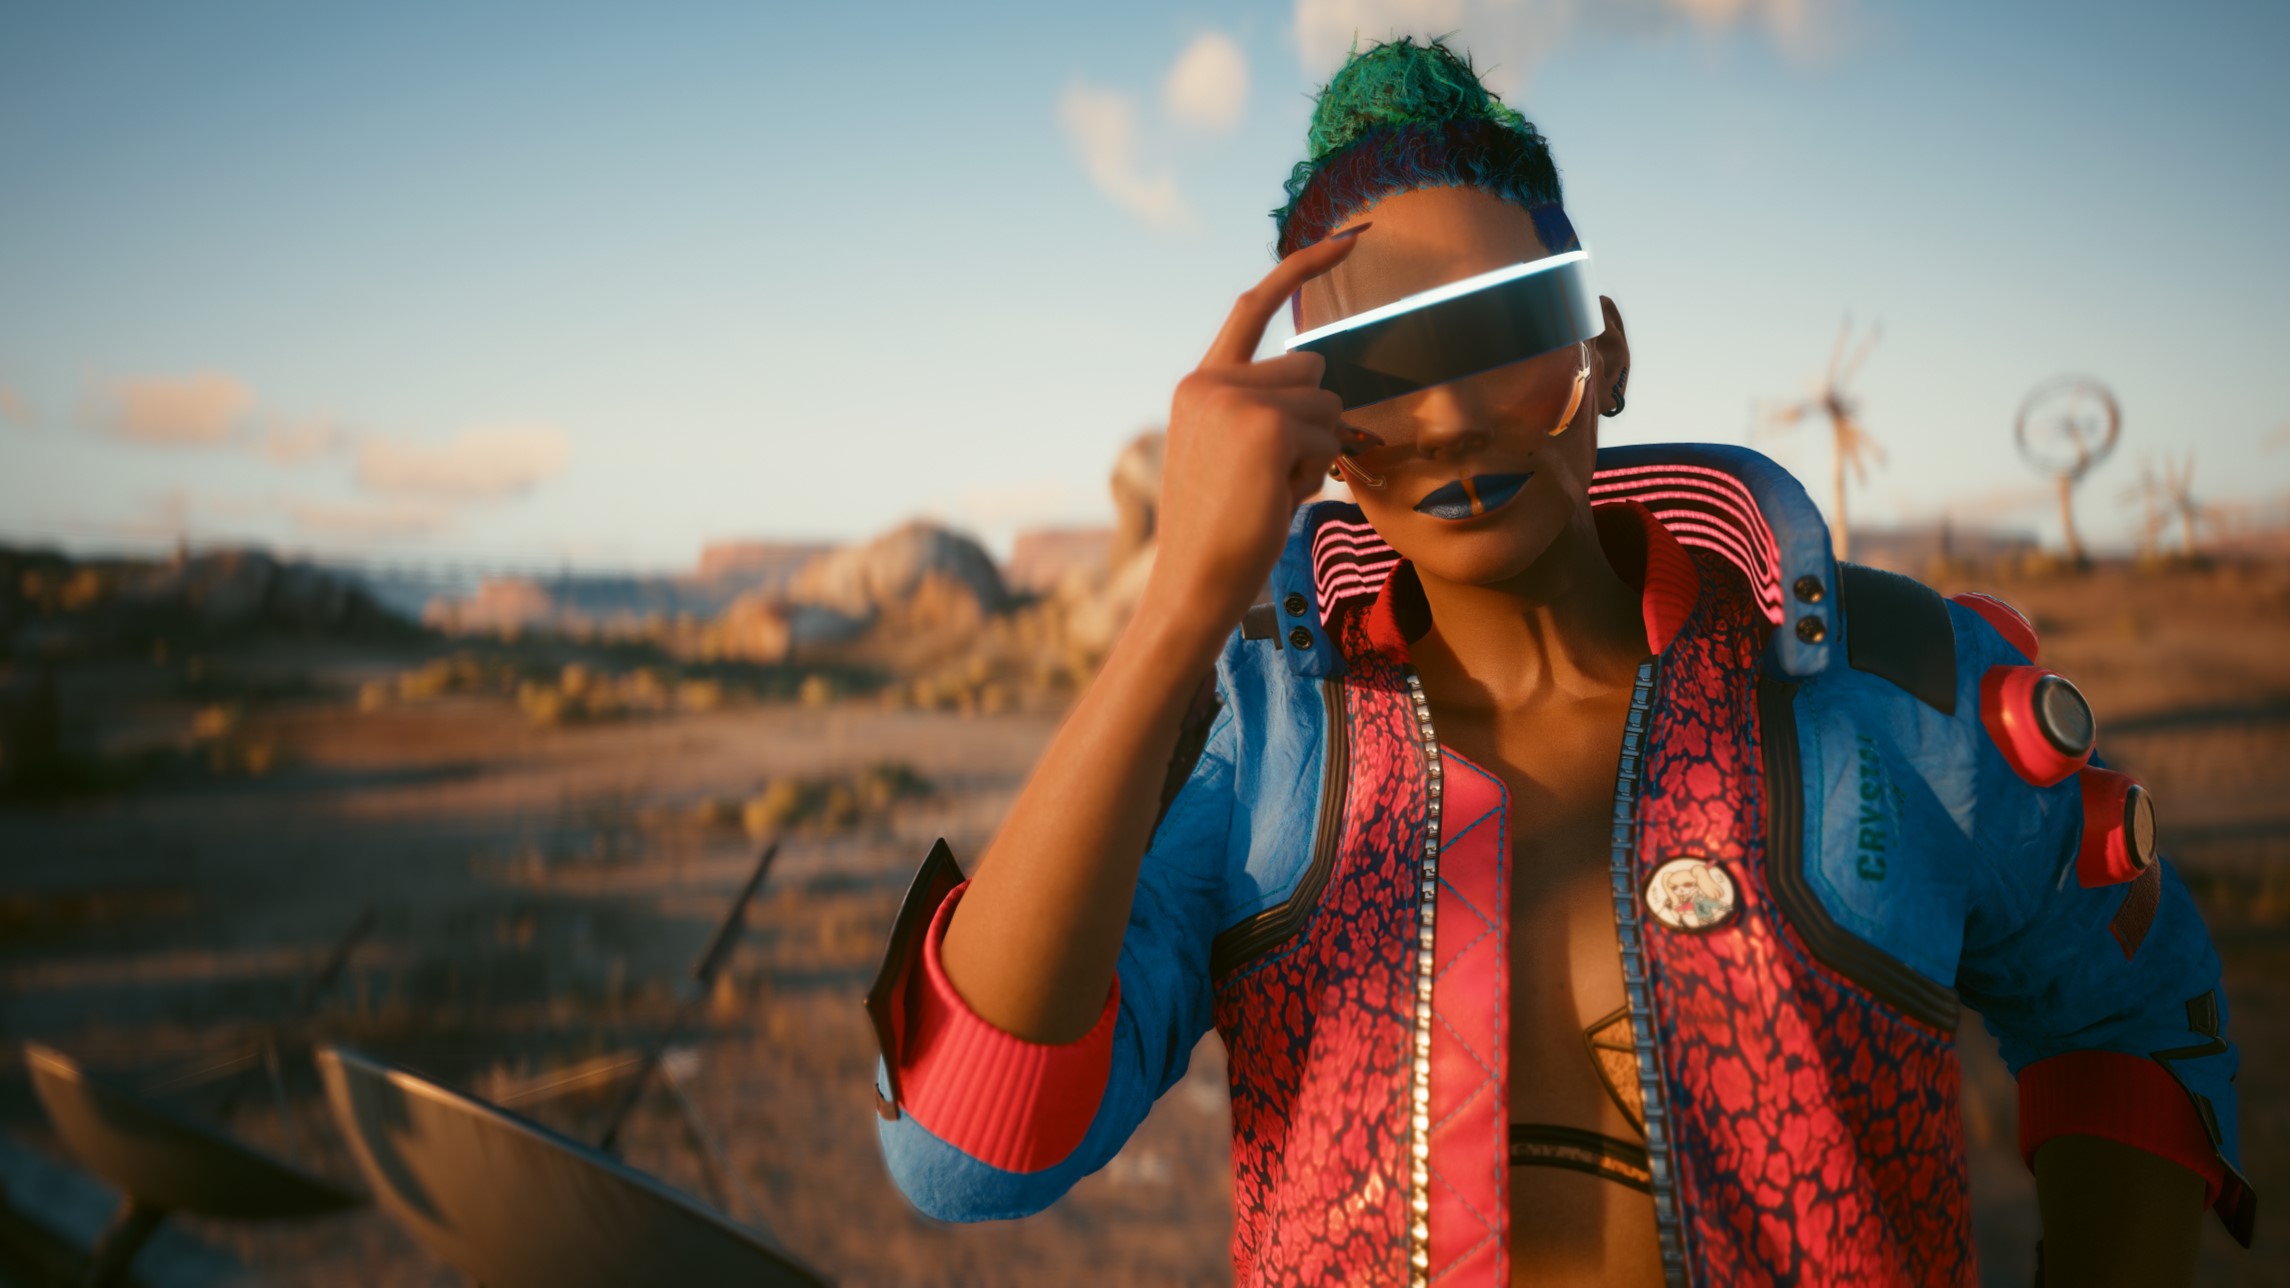  Cyberpunk 2077 player stumbles across main menu easter egg hidden in plain sight, dev says 'I started to doubt you chooms will ever find it' 